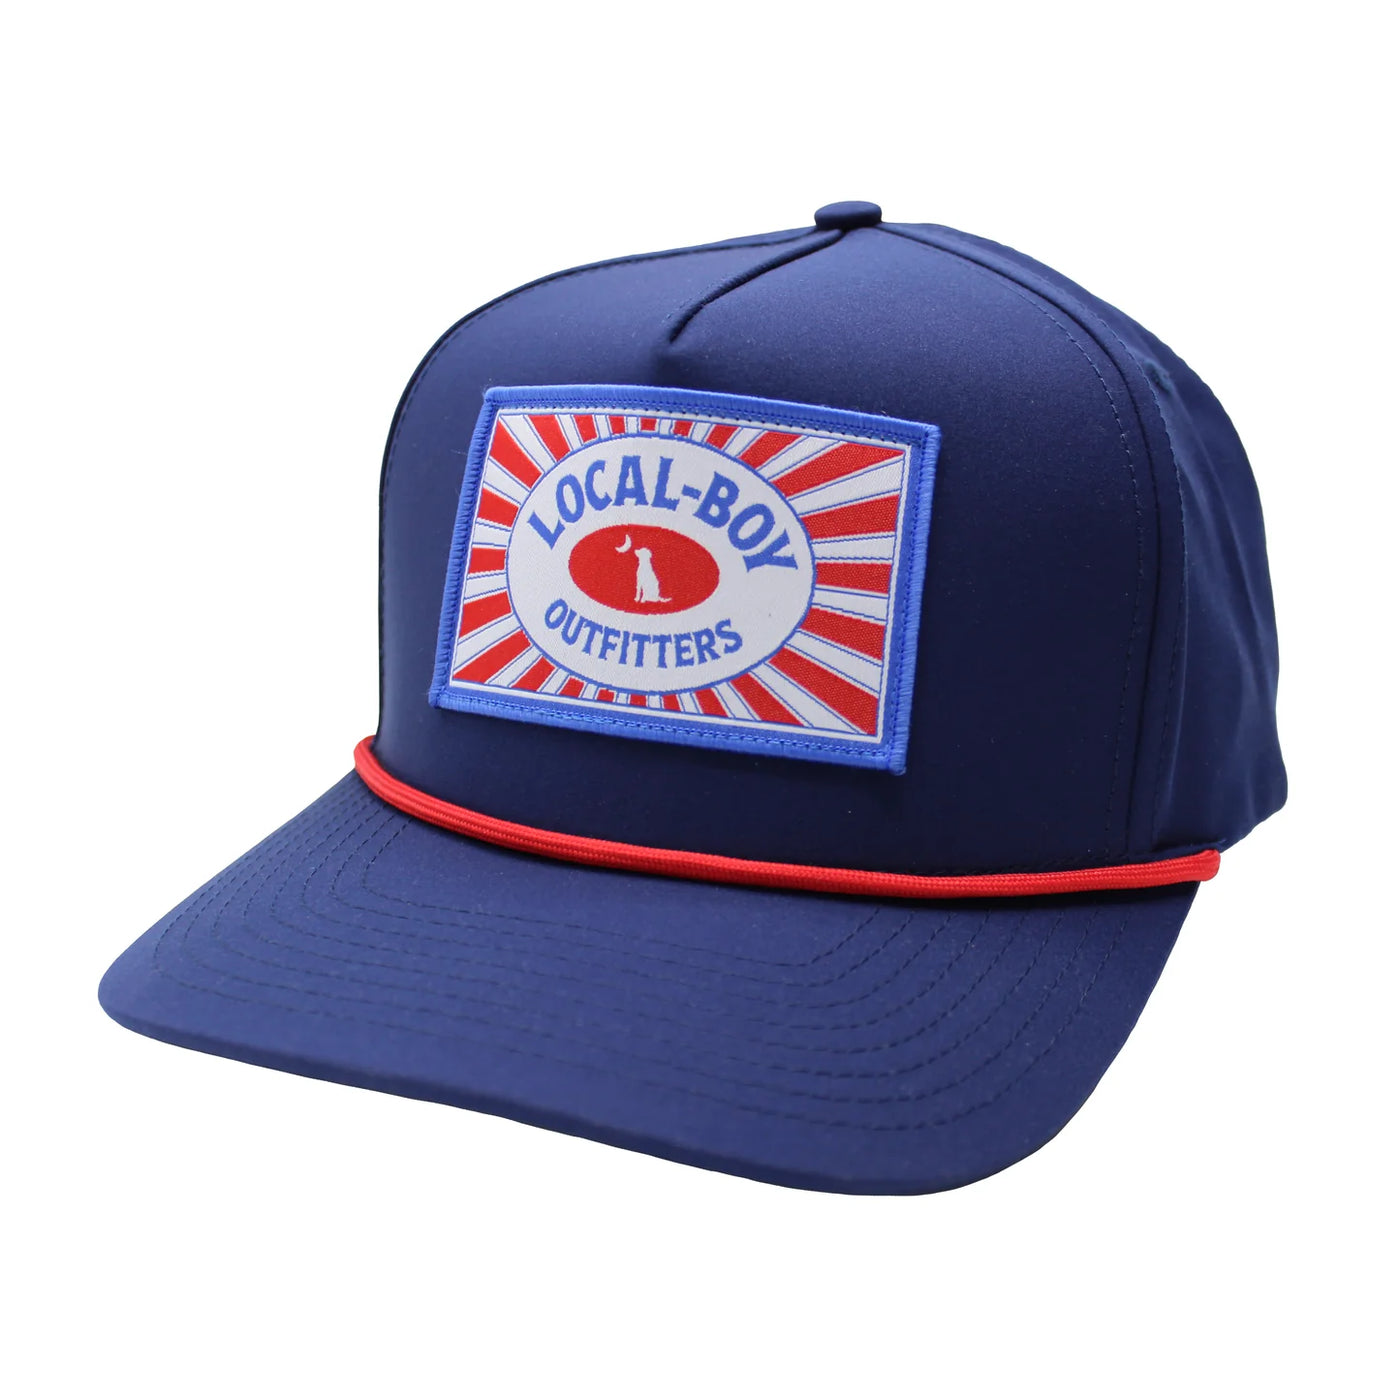 Local Boy Outfitters  Beech Chew Rope Hat